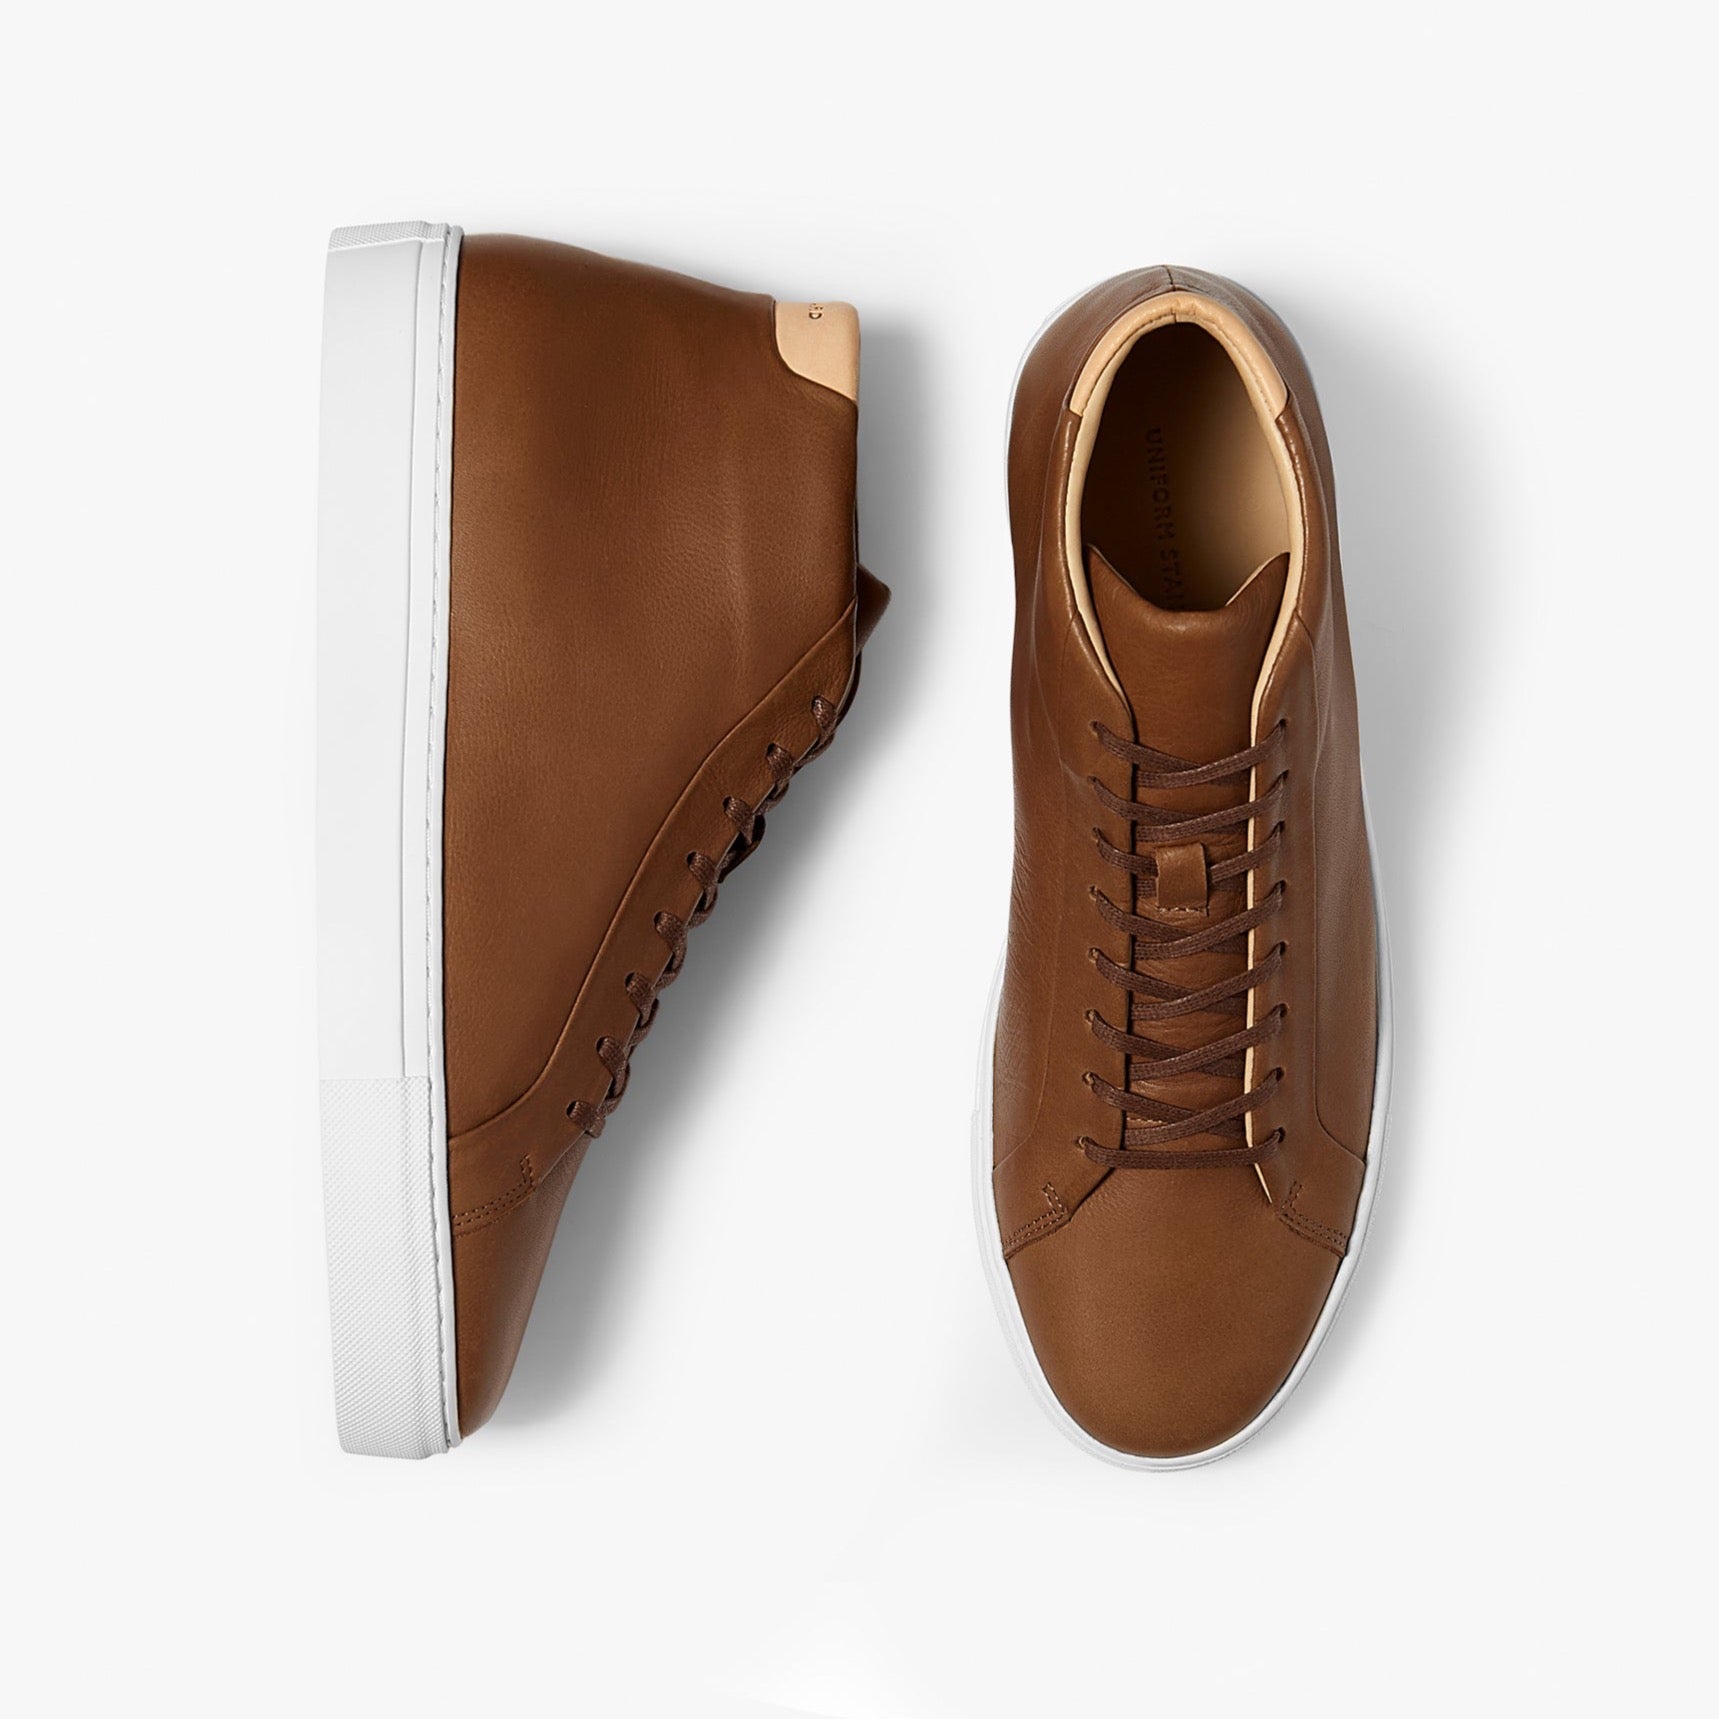 Series 4 Toffee Leather Mens